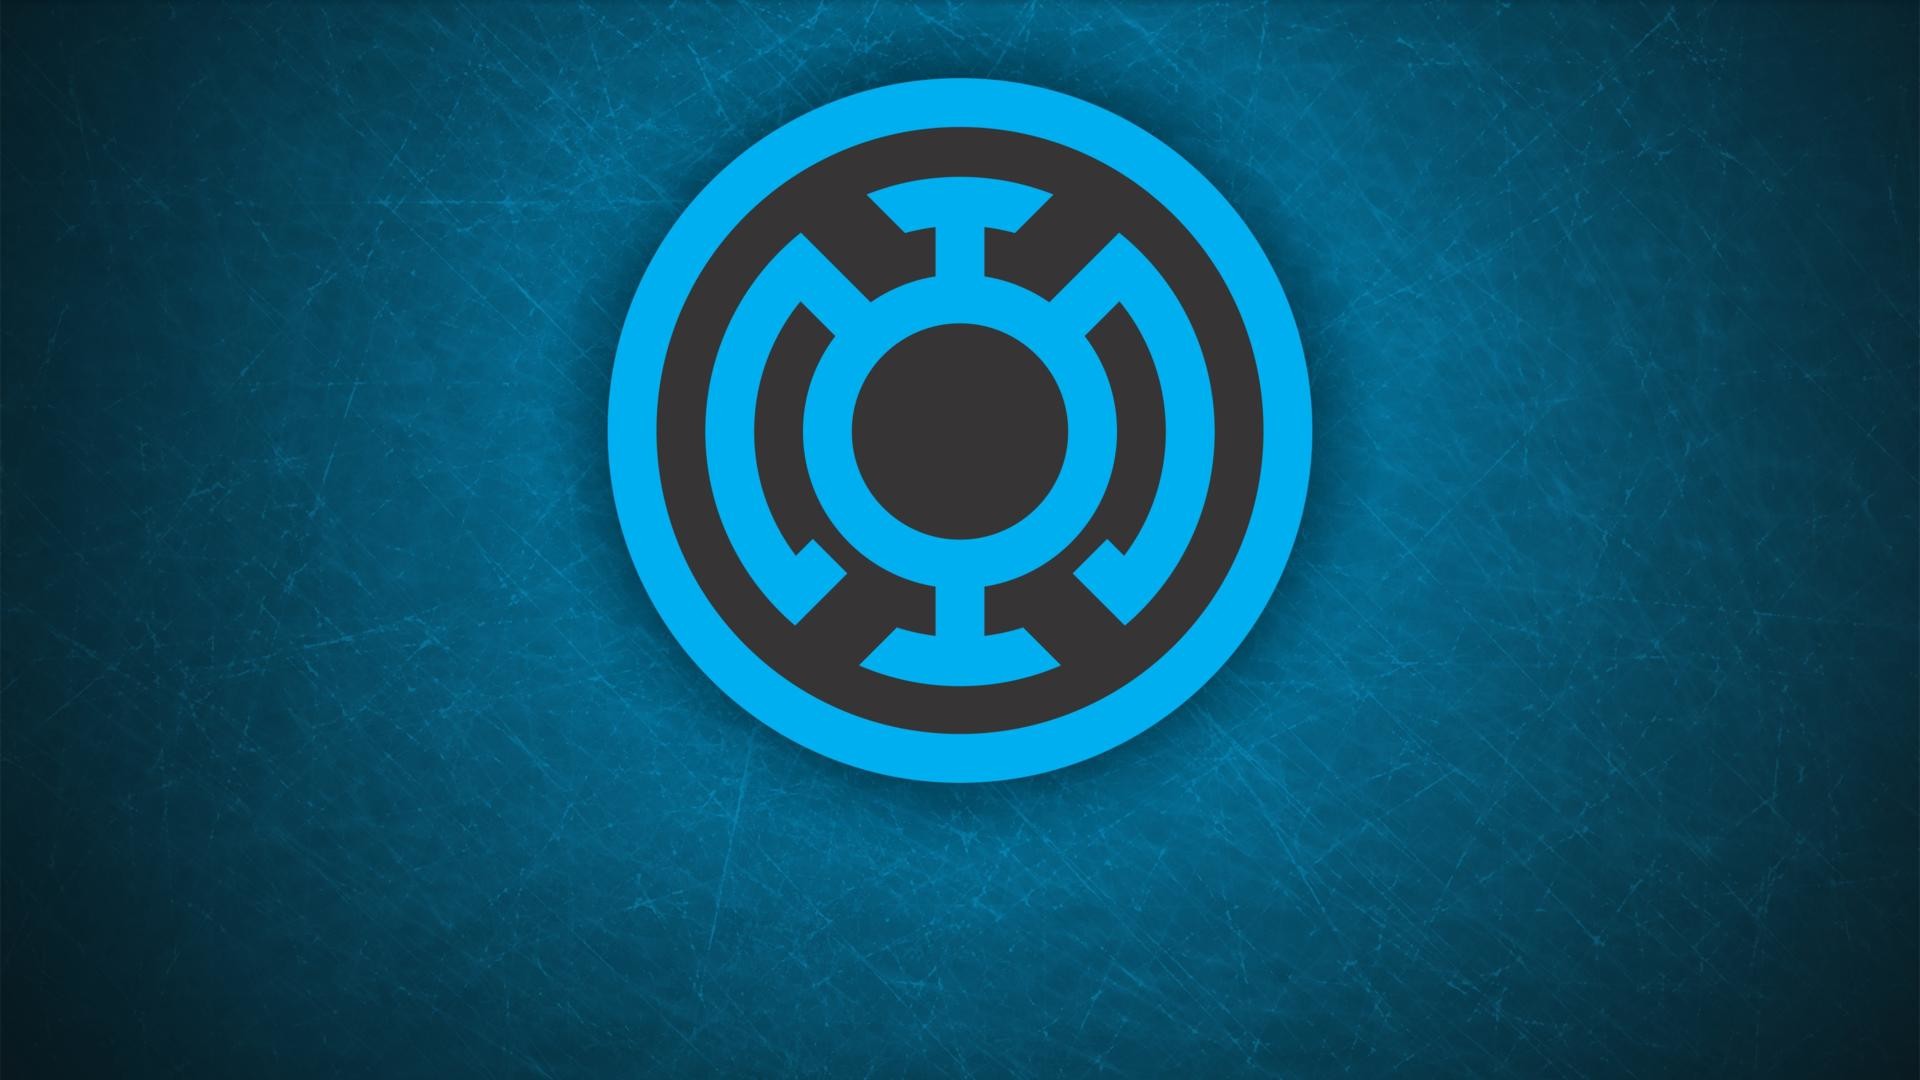 Red Lantern Corps Wallpapers